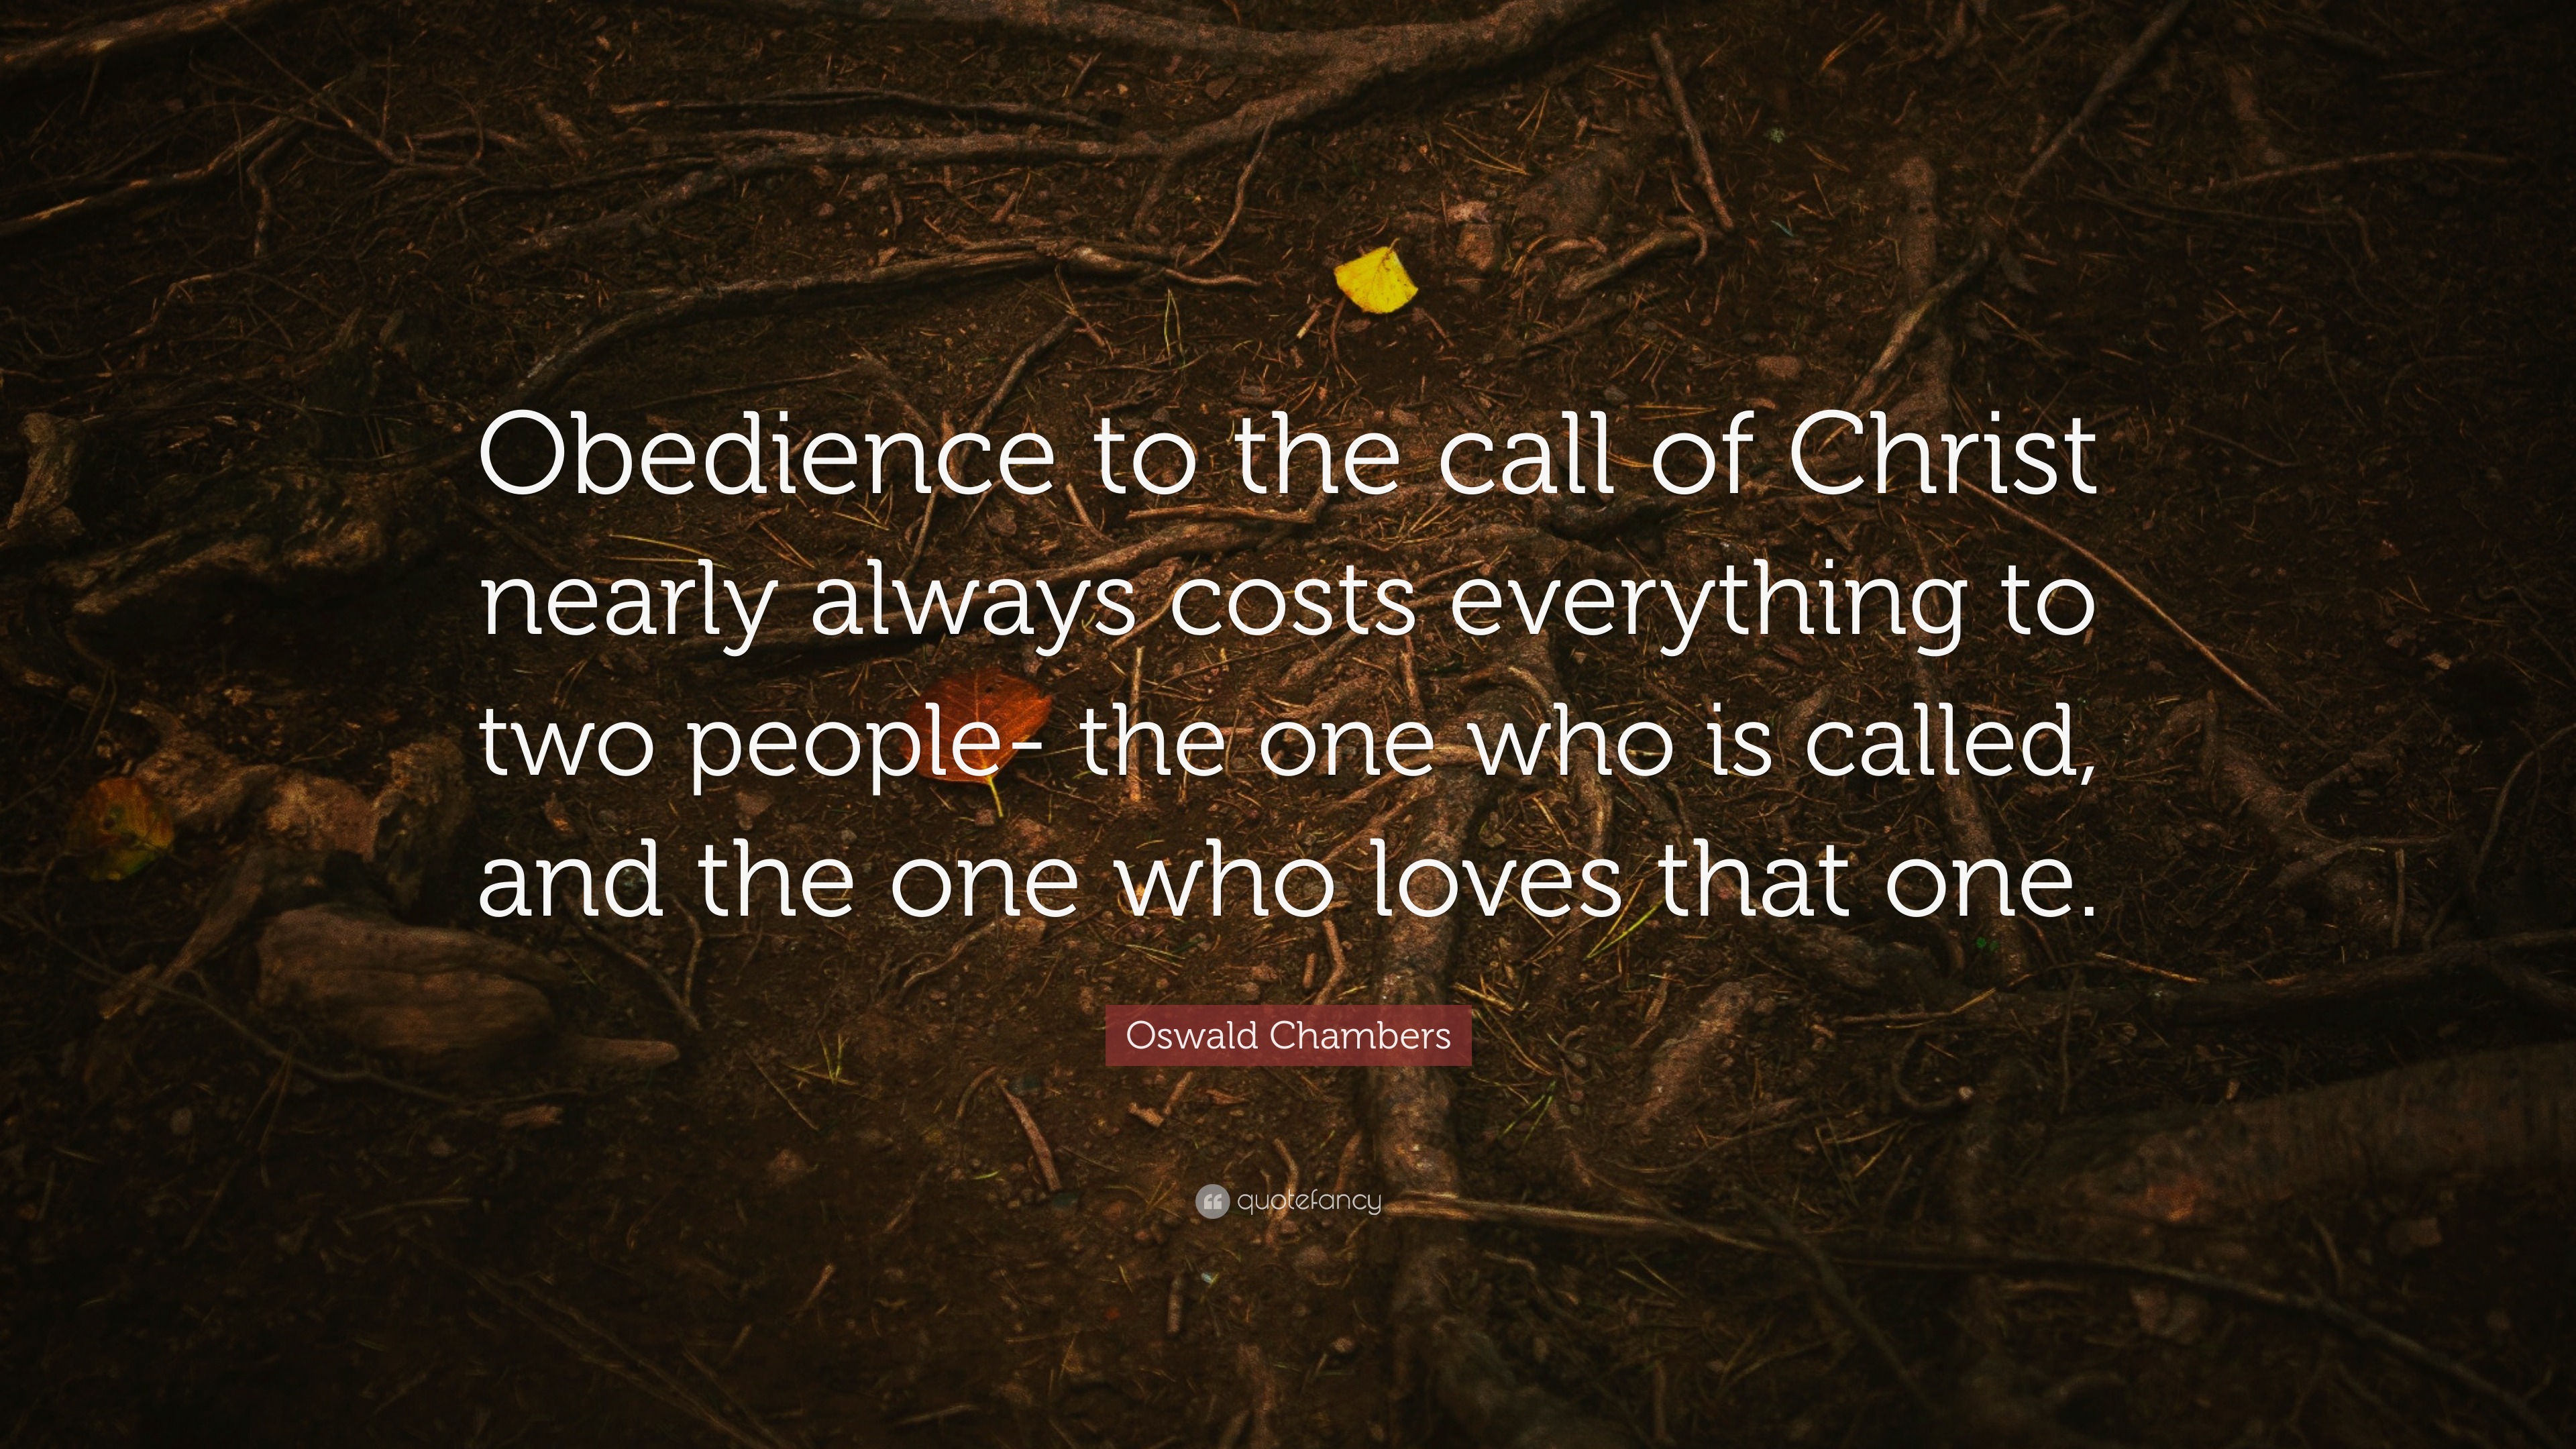 Oswald Chambers Quote: “Obedience to the call of Christ nearly always ...